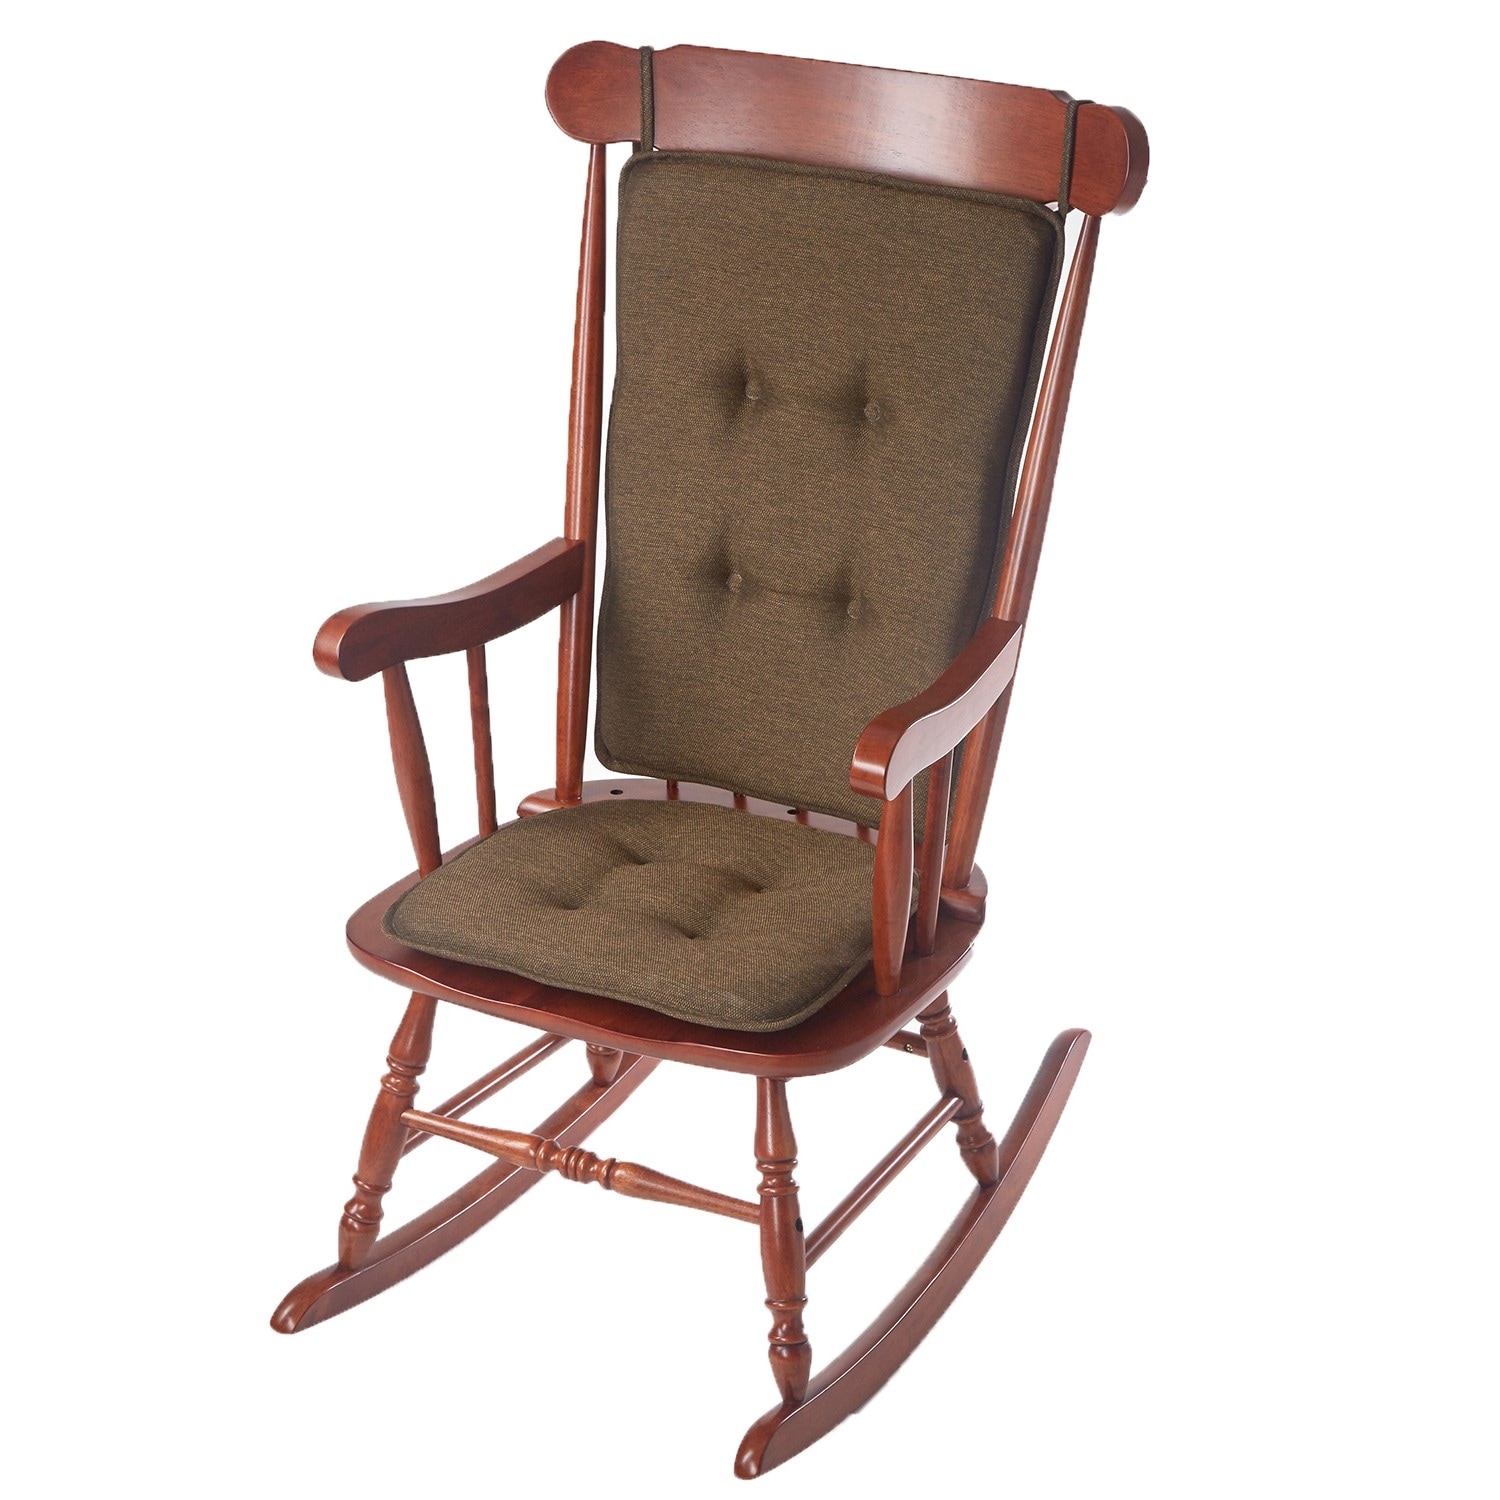 Sweet Home Collection Rocking Chair Cushion Set - Linen